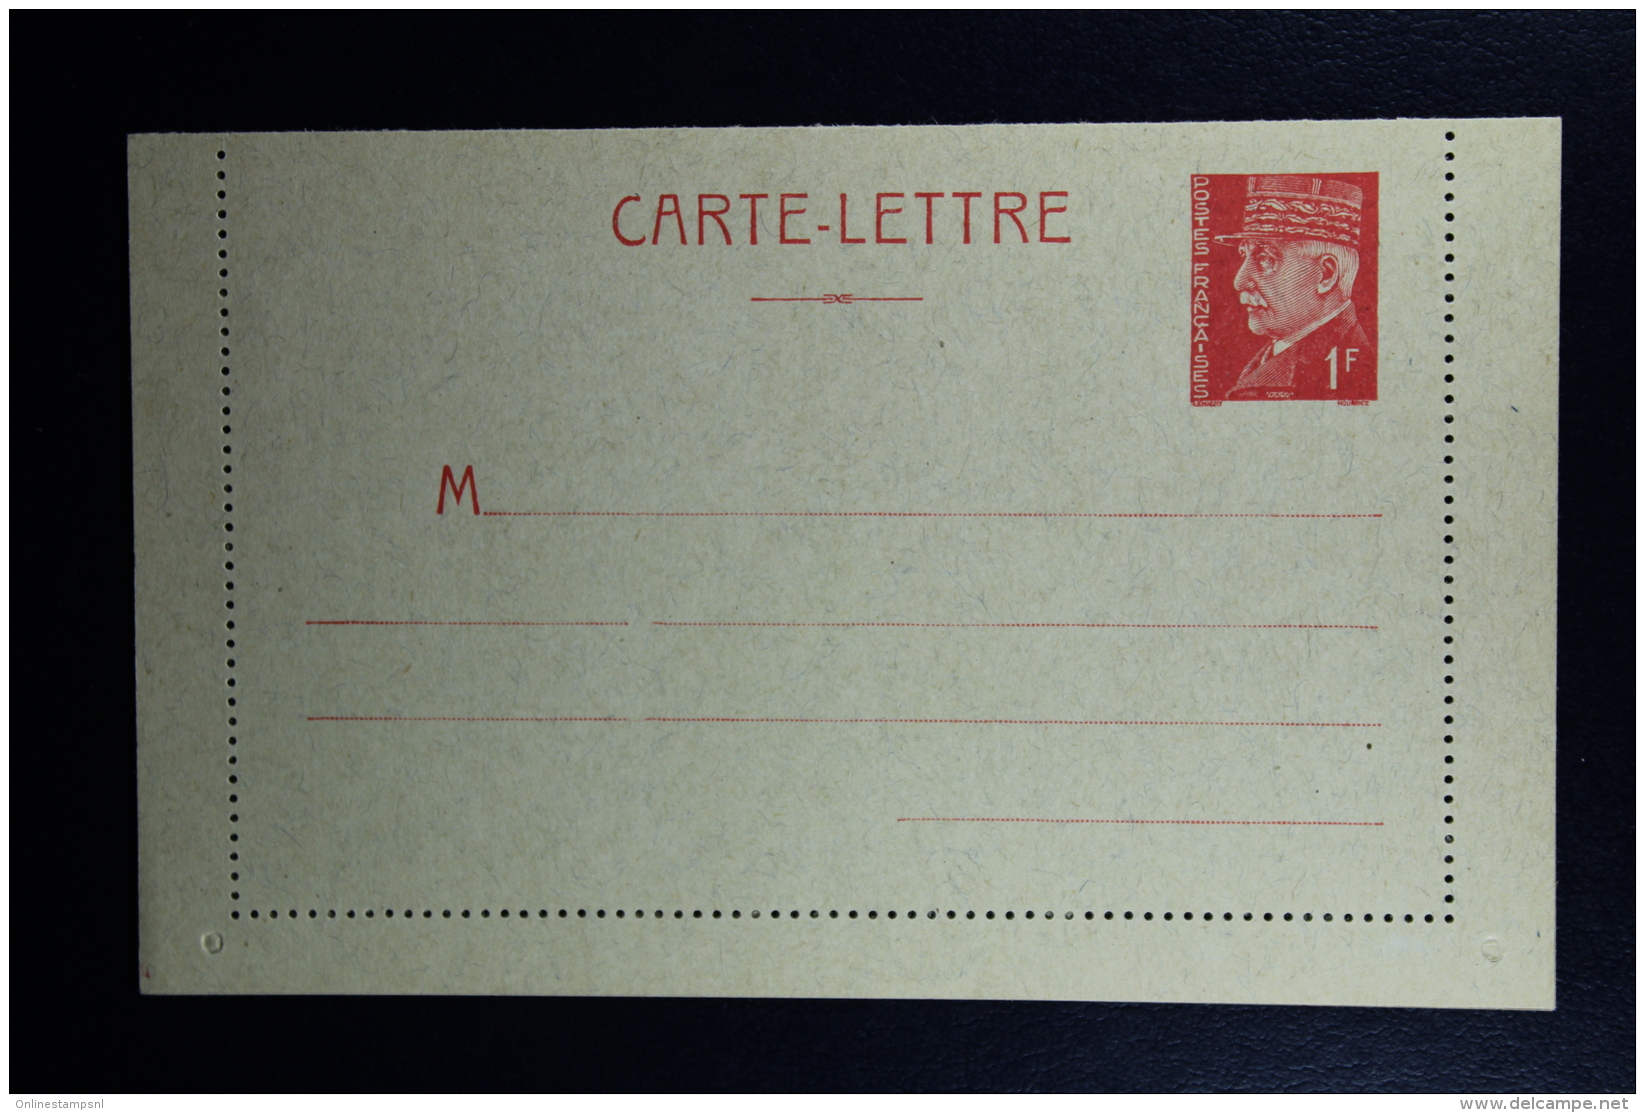 France: Carte-Lettre  Petain 1F  Type C1  Not Used - Cartes-lettres